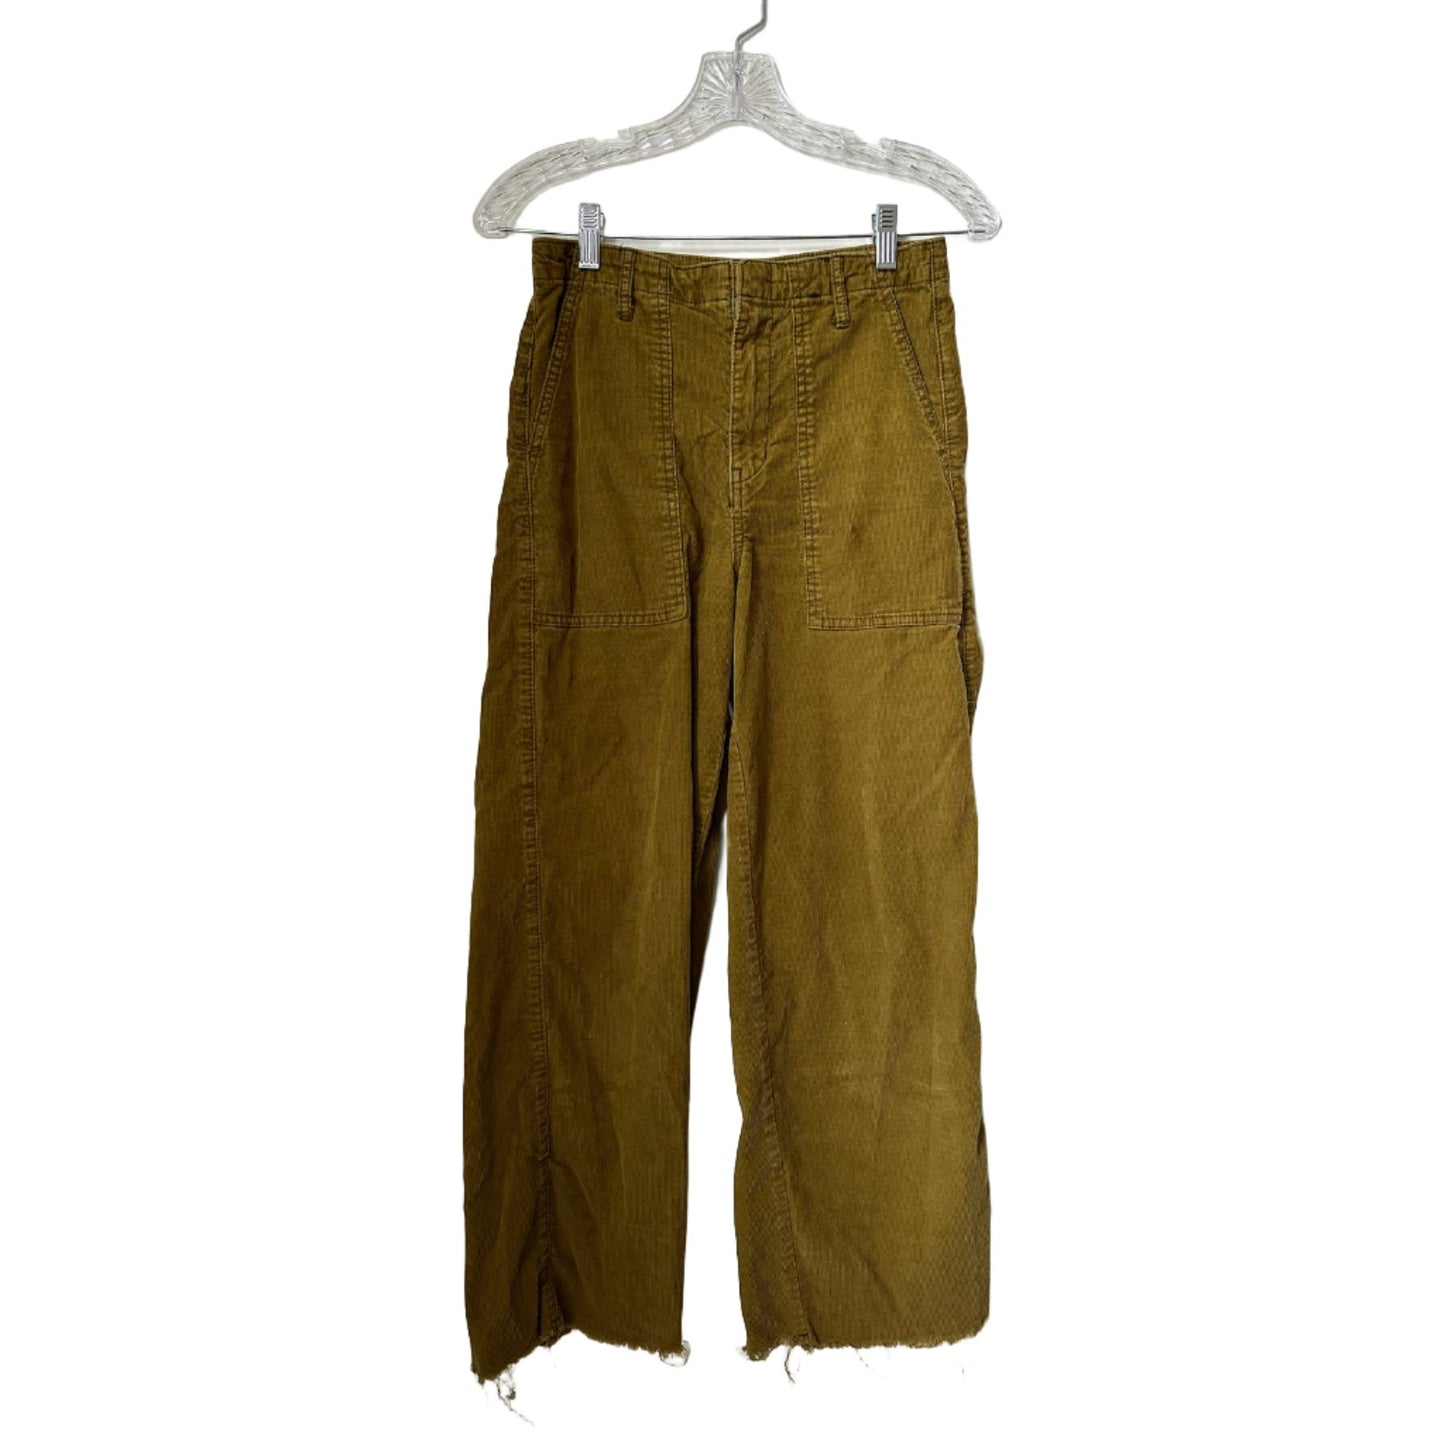 Urban Outfitters BDG Corduroy Pants, Size 2